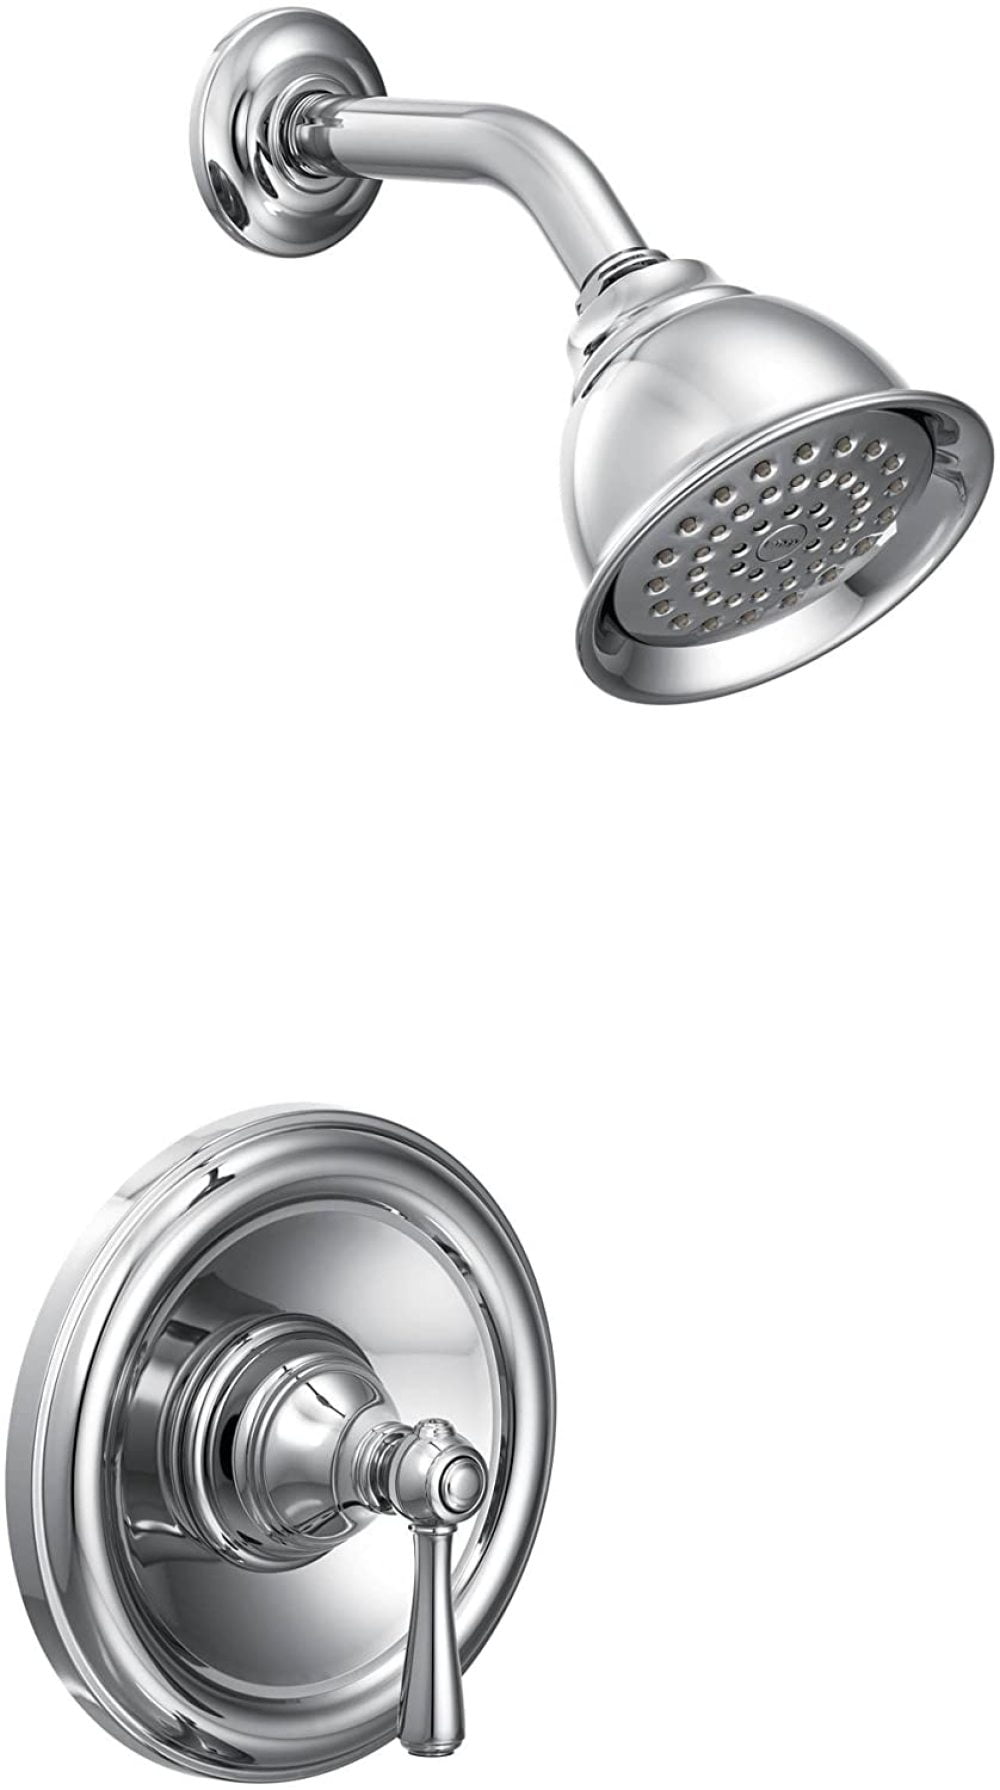 The Eco-Water SPA The Future of Shower Heads Is Here 50% OFF FAST SHIPPING 